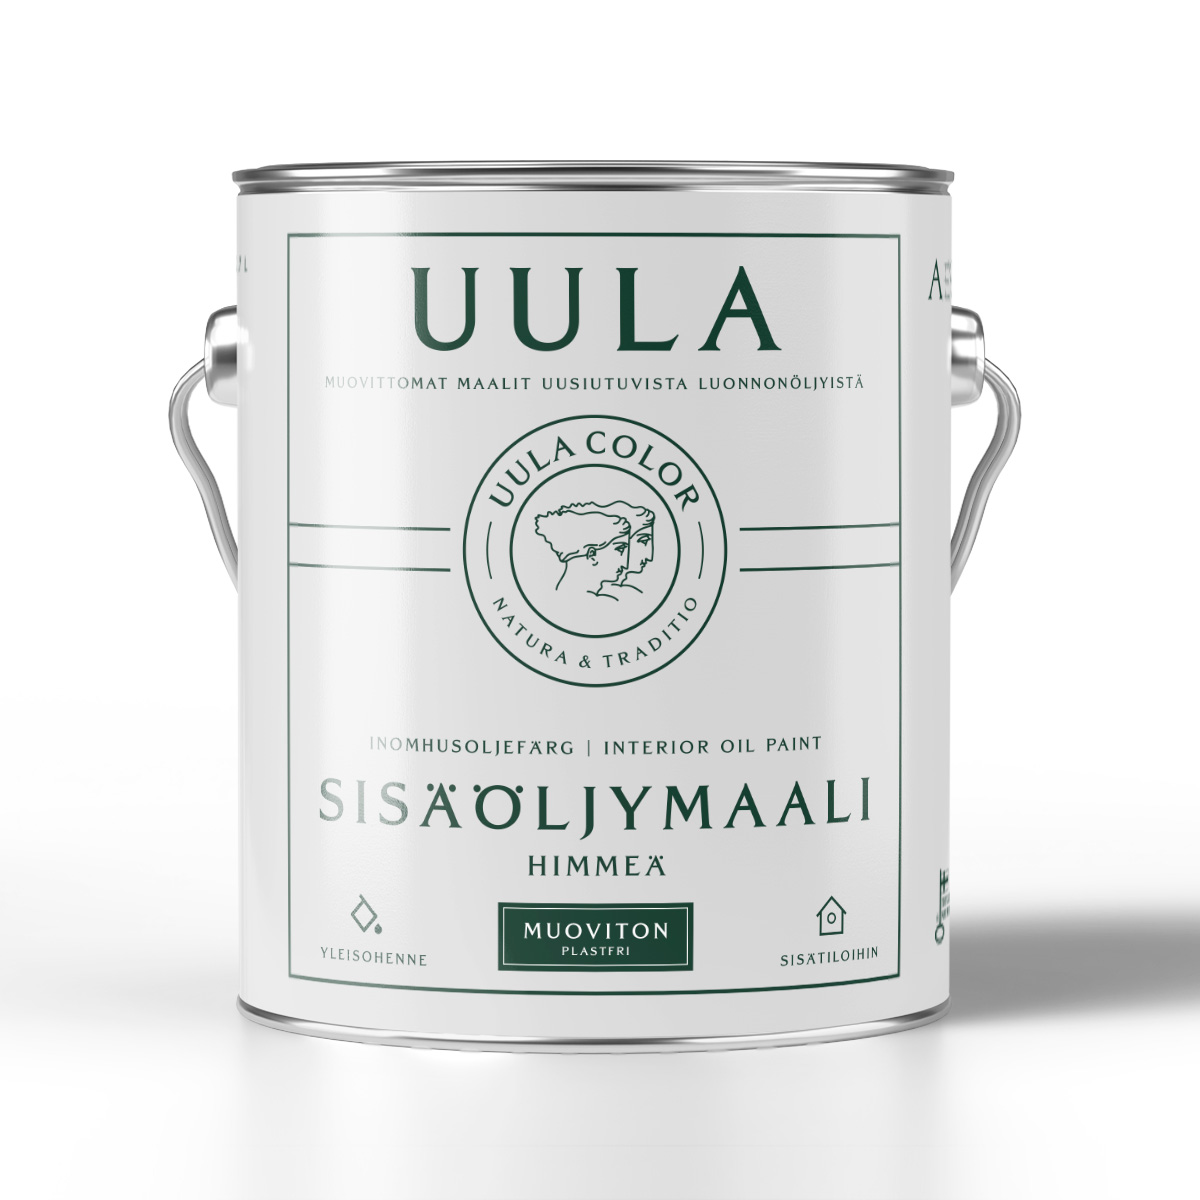 Uula Interior Oil Paint Traditional